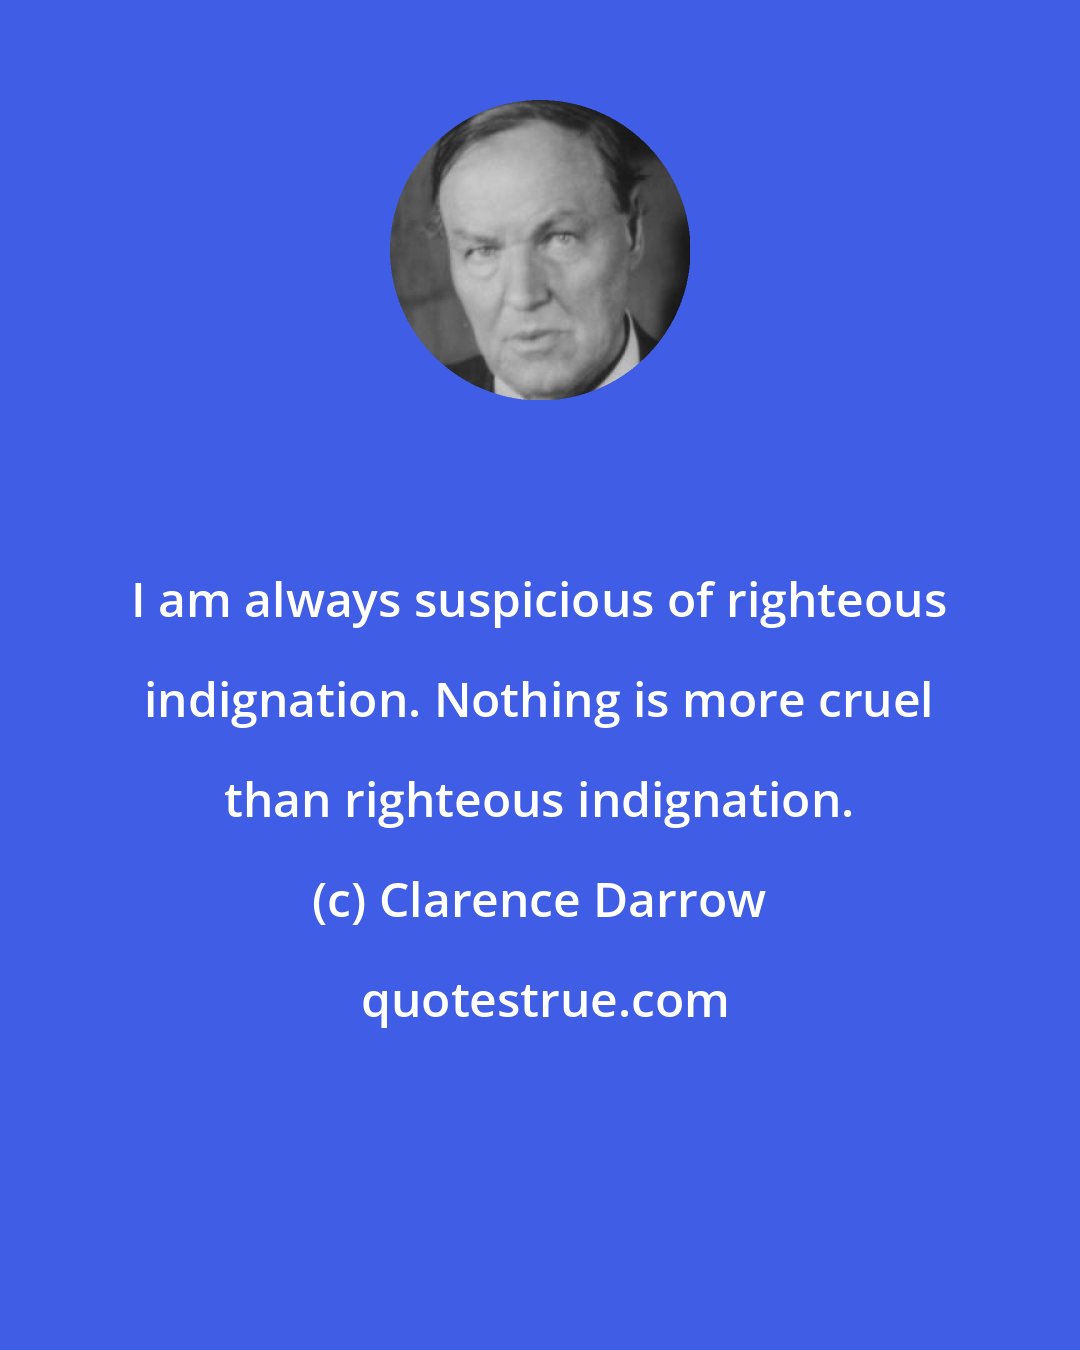 Clarence Darrow: I am always suspicious of righteous indignation. Nothing is more cruel than righteous indignation.